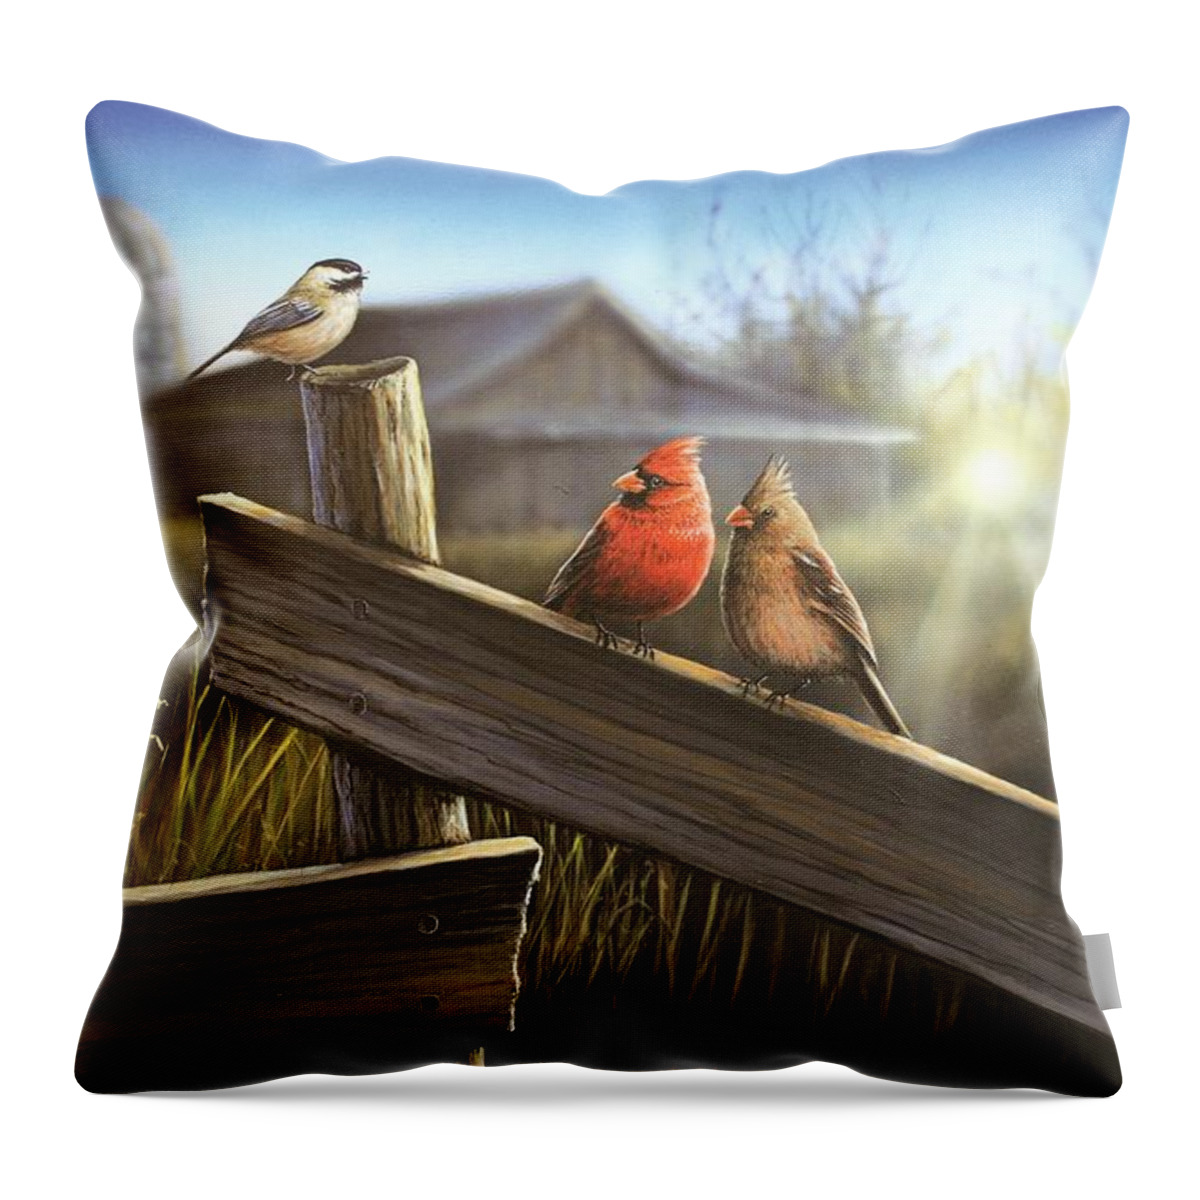 Fence Throw Pillow featuring the painting Morning Song by Anthony J Padgett